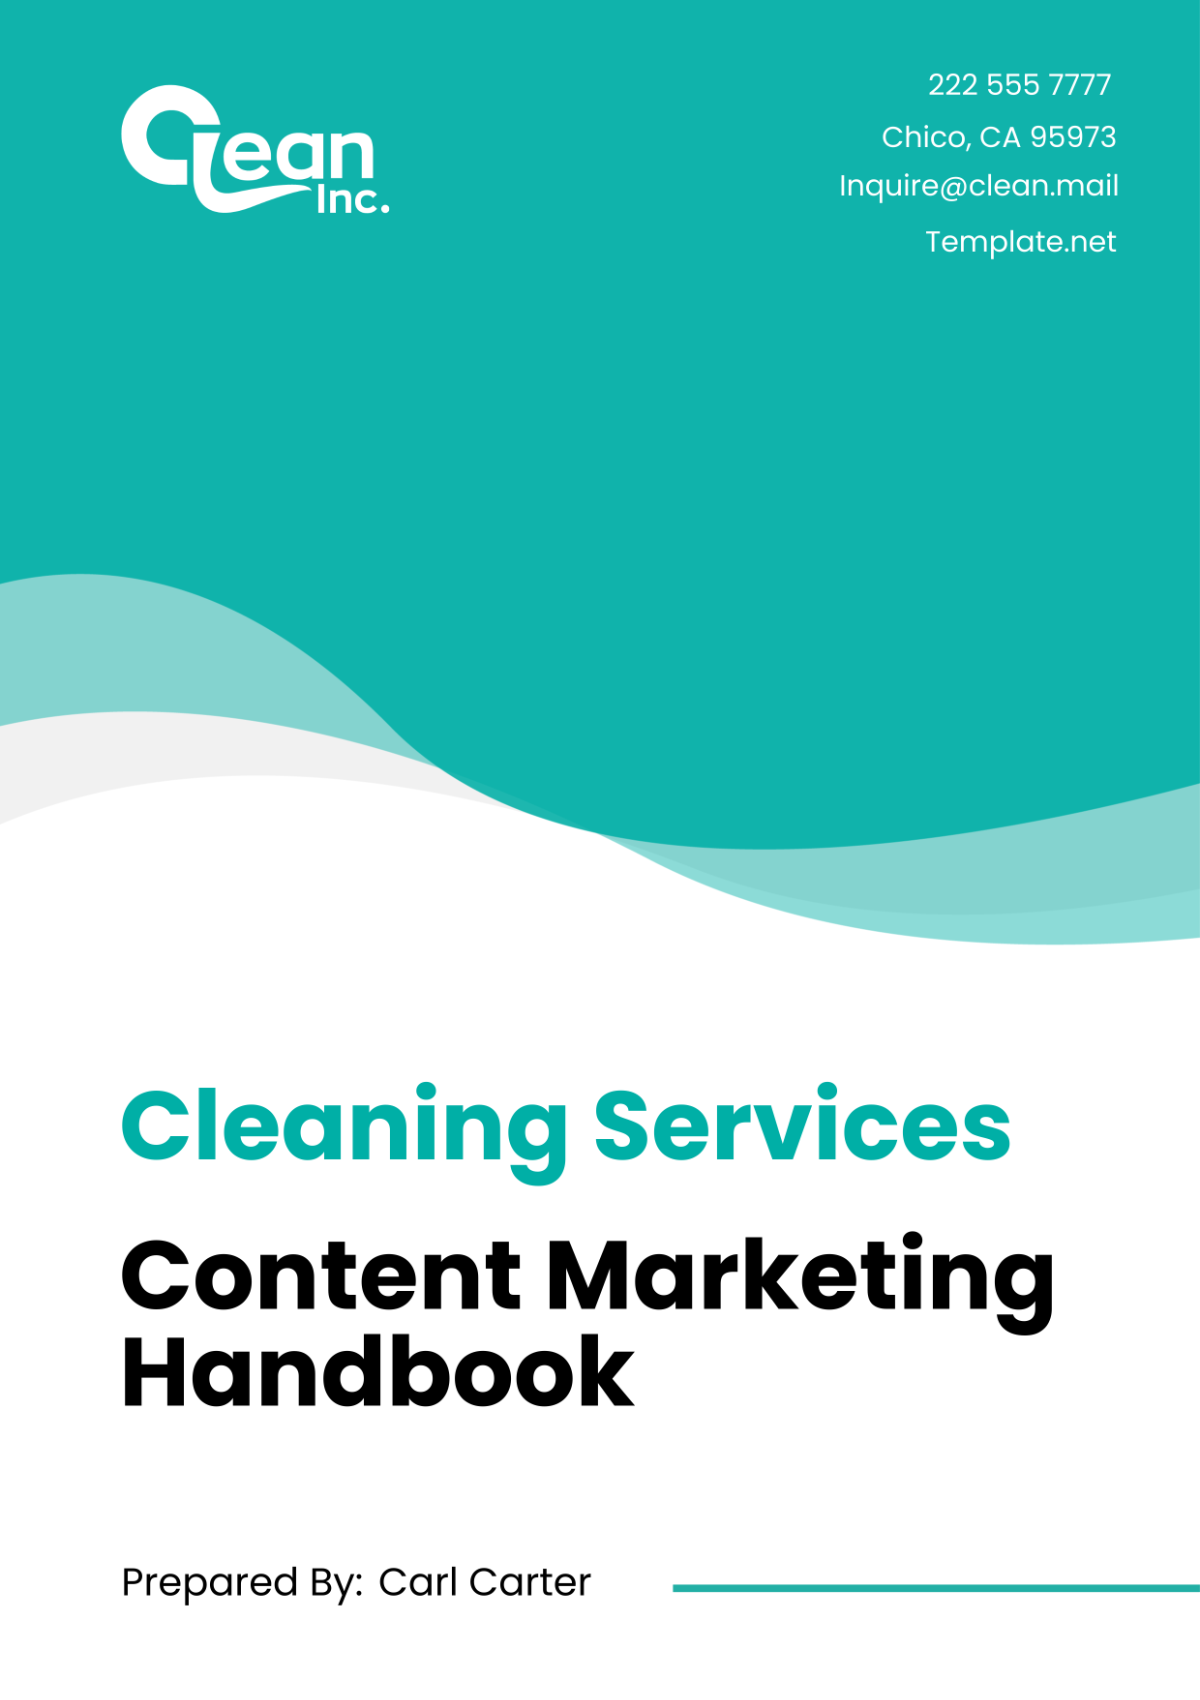 Cleaning Services Content Marketing Handbook Template